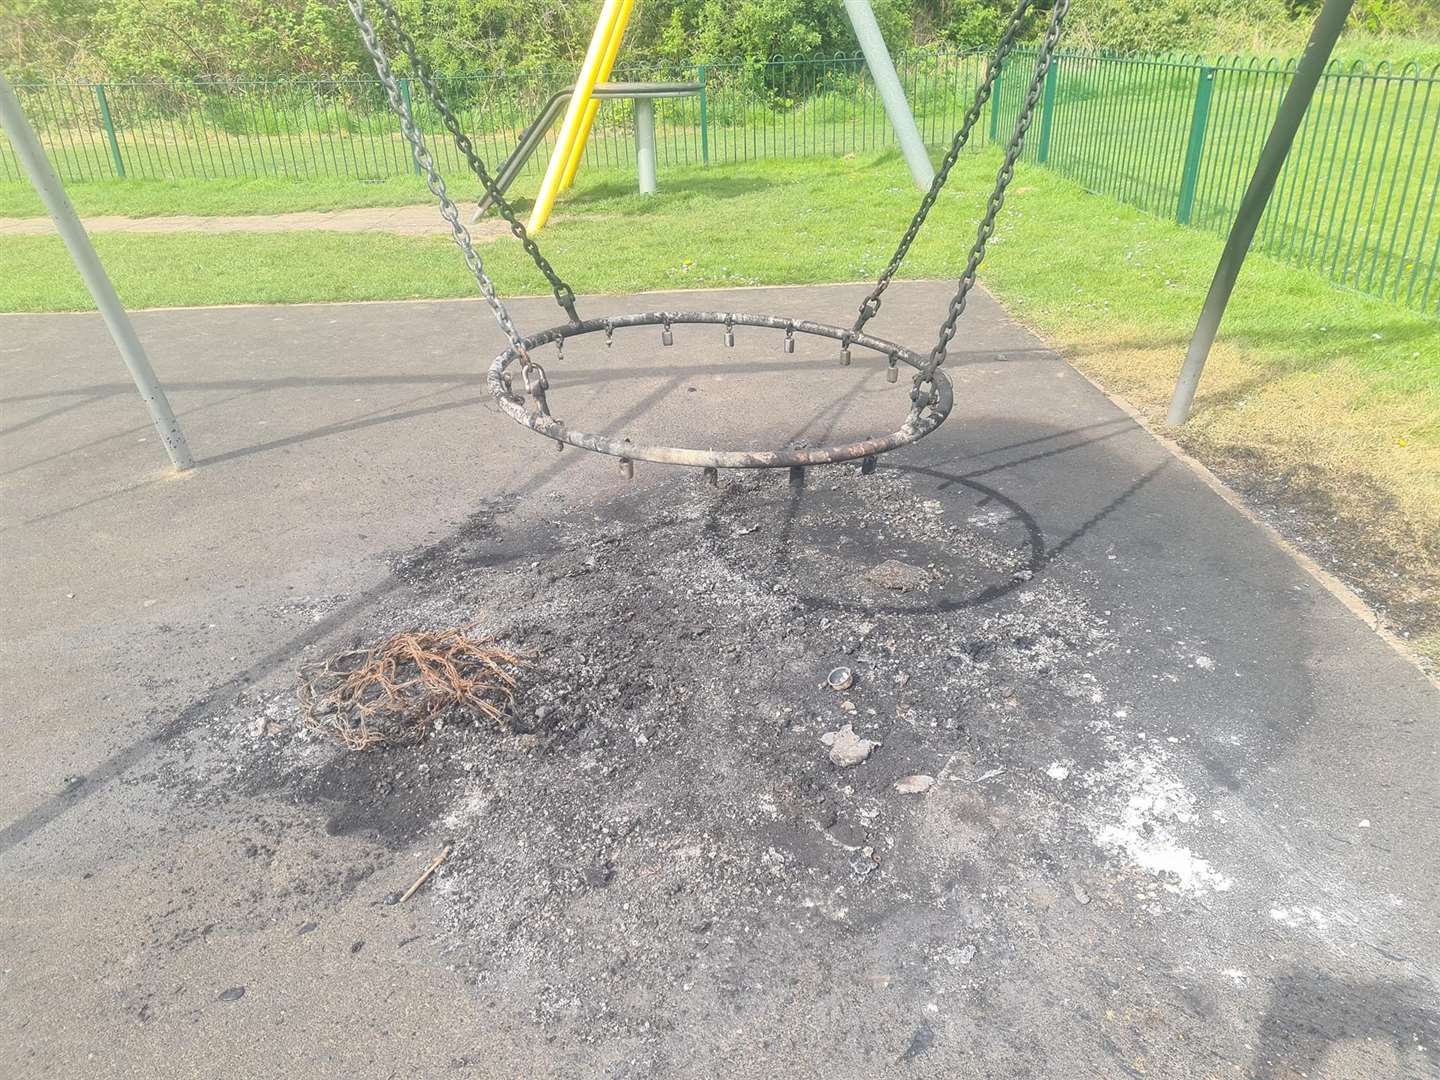 The swing was destroyed. Picture: Tracy Kay